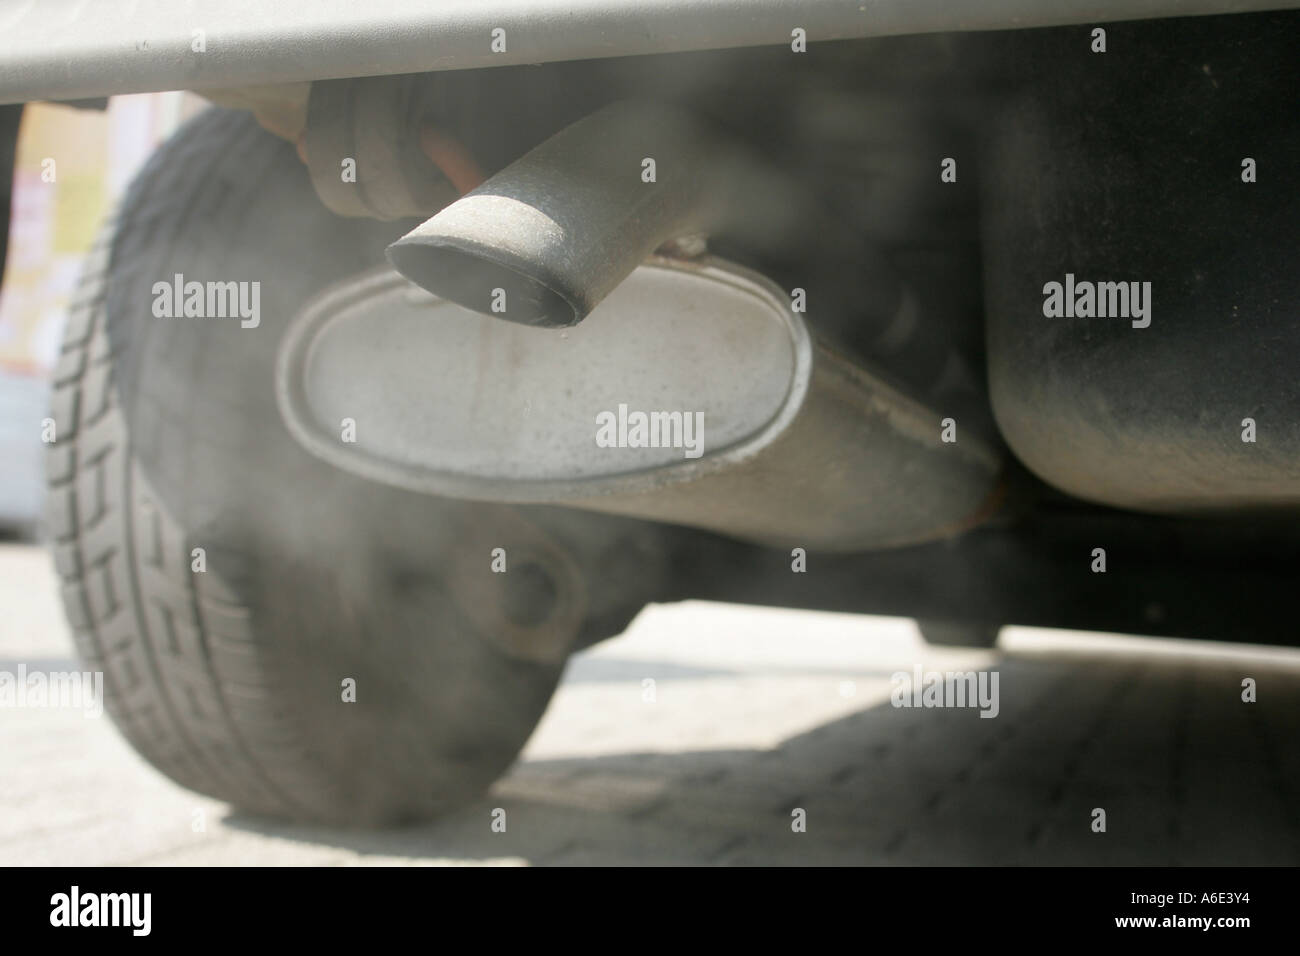 DEU, 04.04.2005, exhaust of an old Dieselfahreuges, fine dust emissions Stock Photo